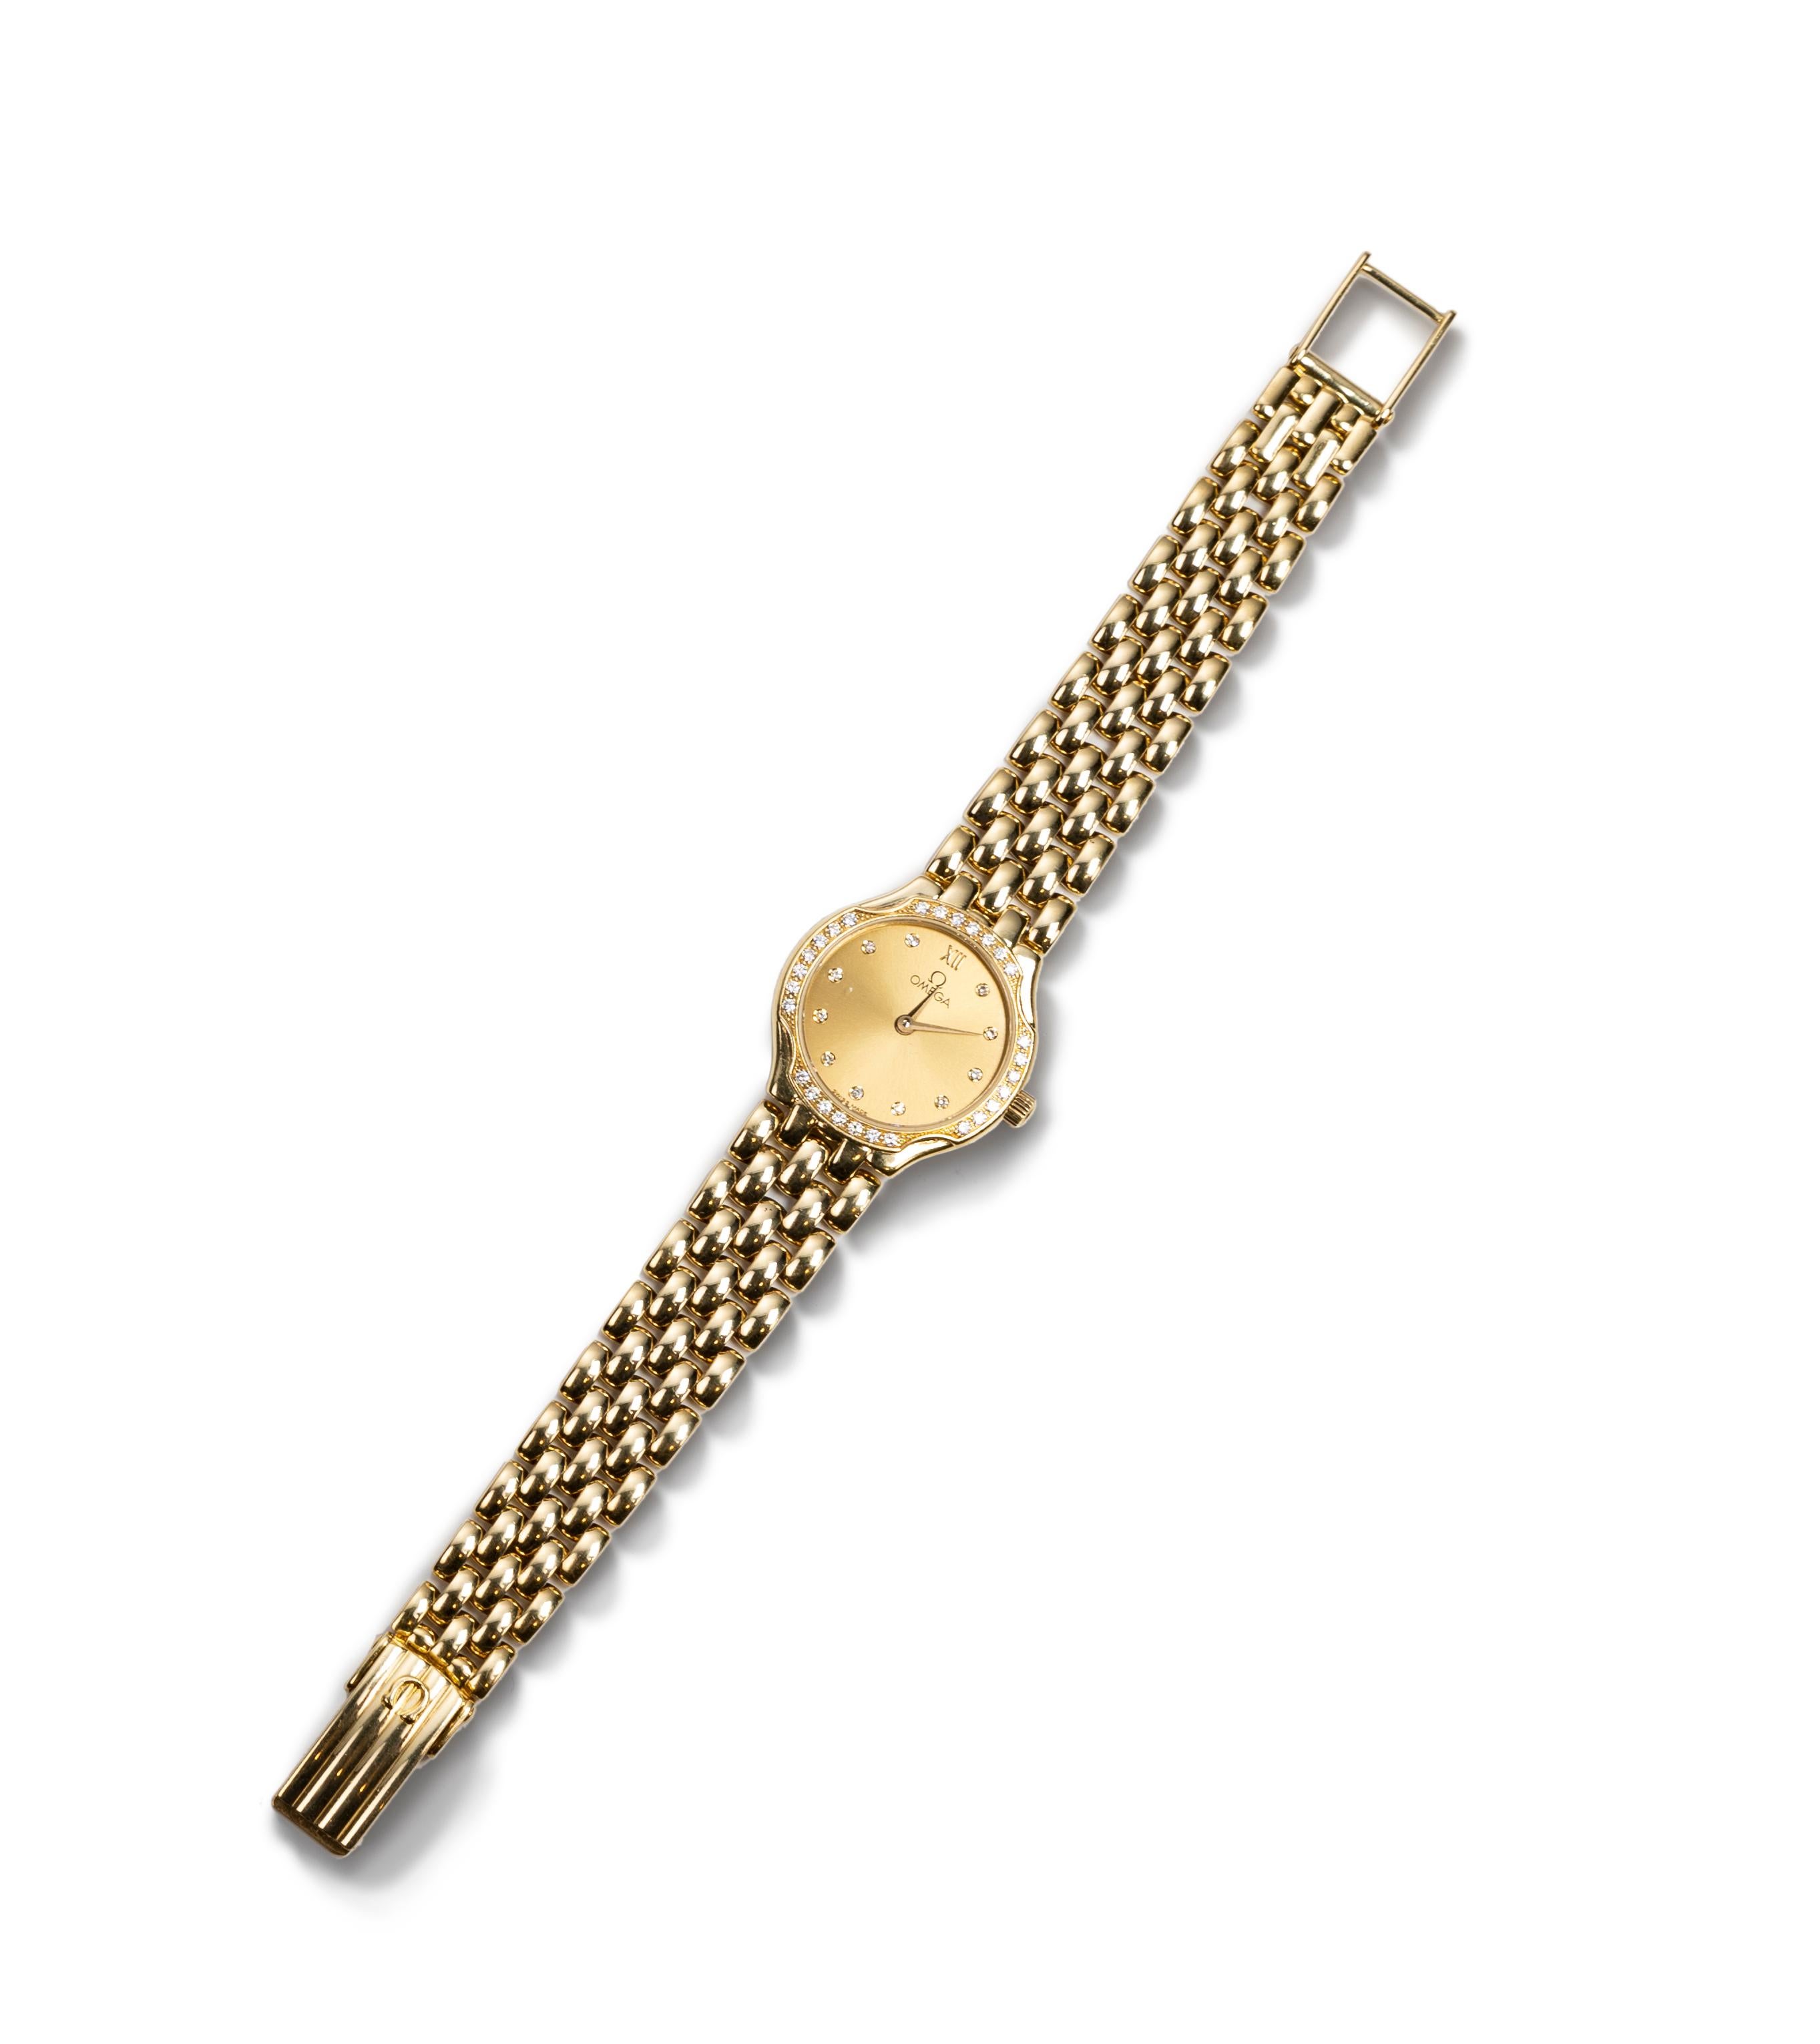 Omega De Ville from the early 90's.  18K yellow gold, quartz, fine white brilliant cut diamonds.  Link style bracelet.  22.5 mm cushion-form case that is very thin.  This watch is in pristine condition.